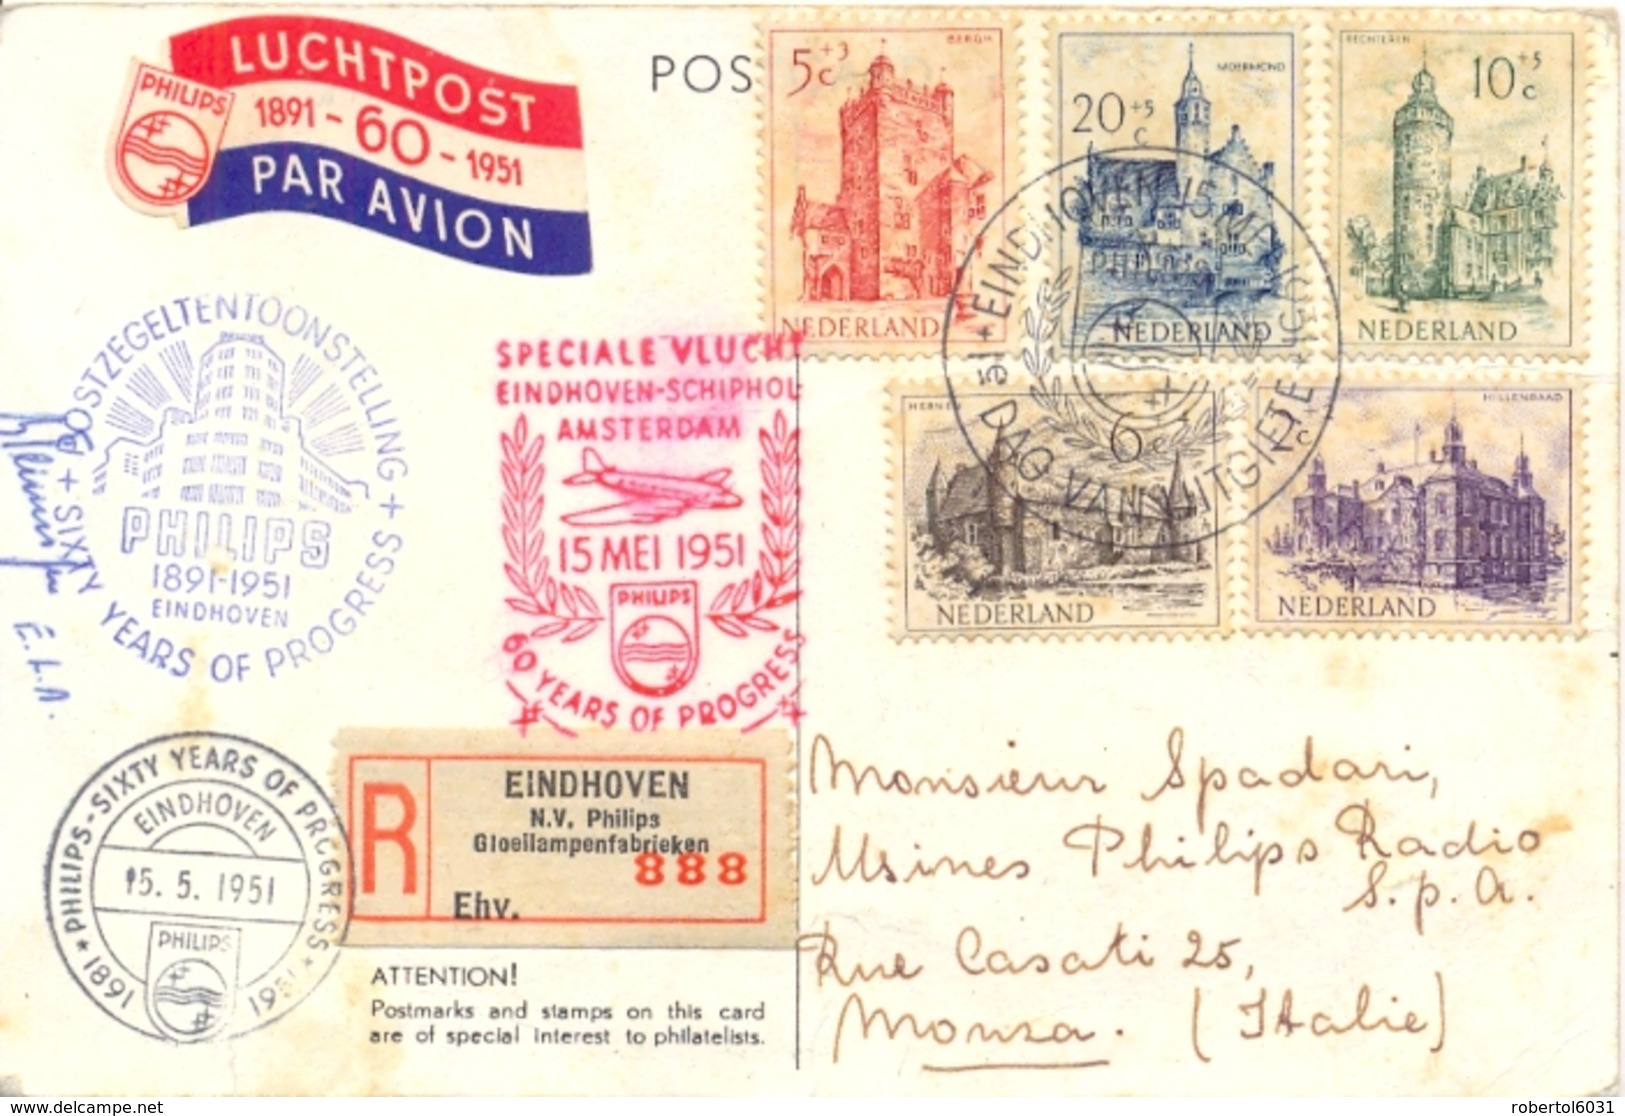 Netherlands 1951 60 Years Of Philips Picture Postcard Flown Eindhoven-Schiphol-Amsterdam By Special Flight - Luftpost